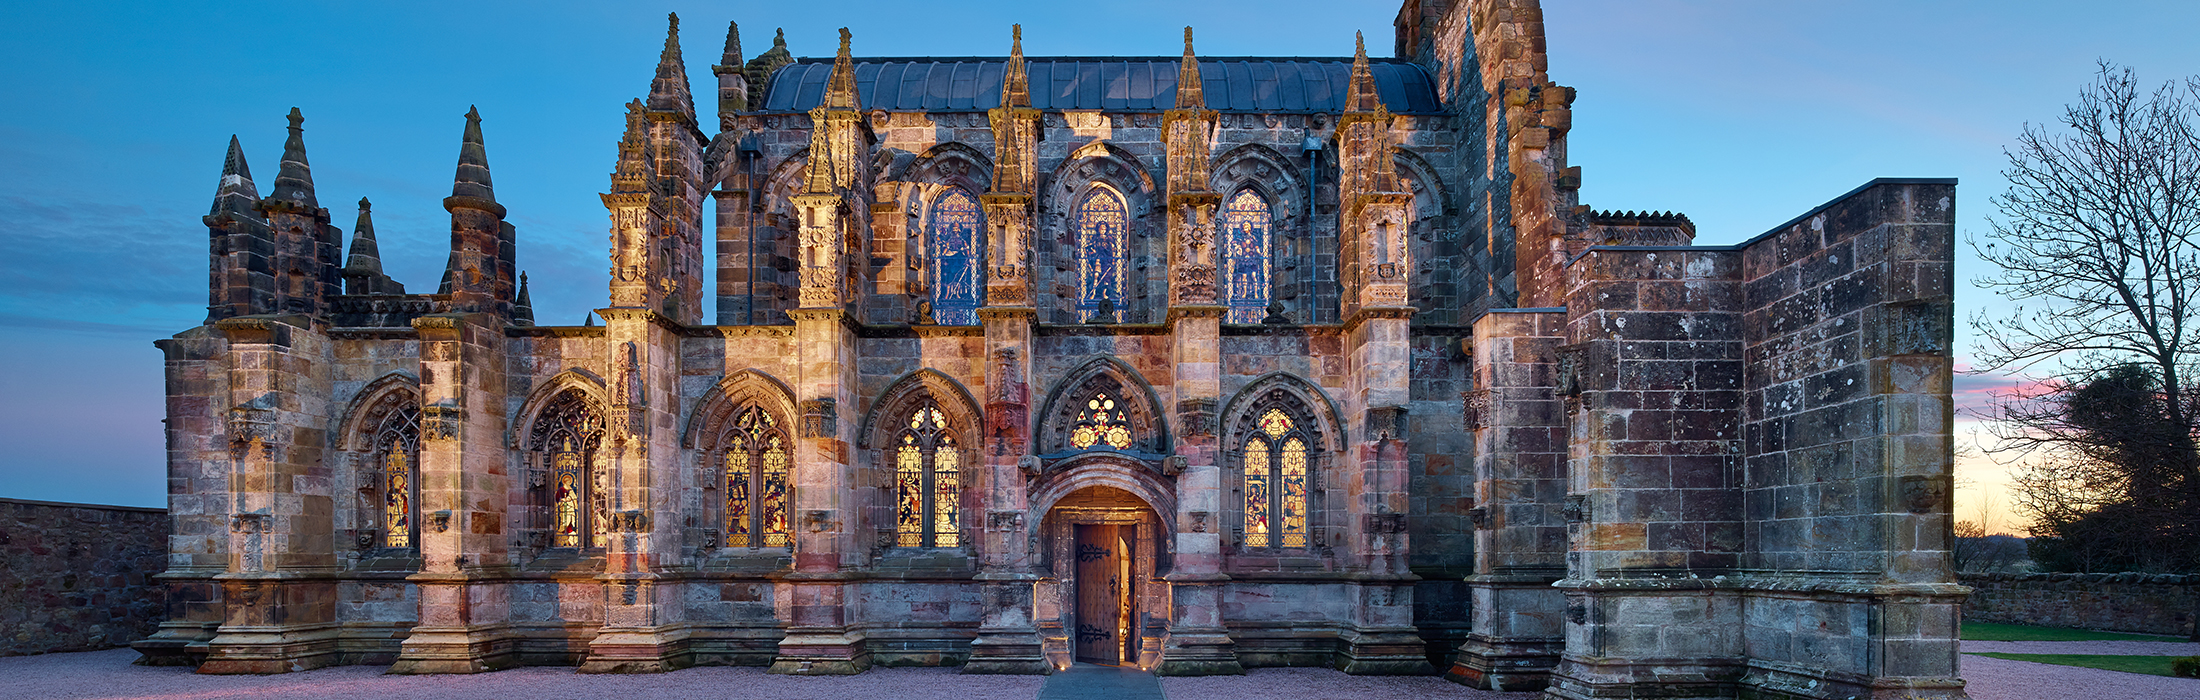 Rosslyn Chapel, with its Gothic architecture, was perfect for filming The Da Vinci Code